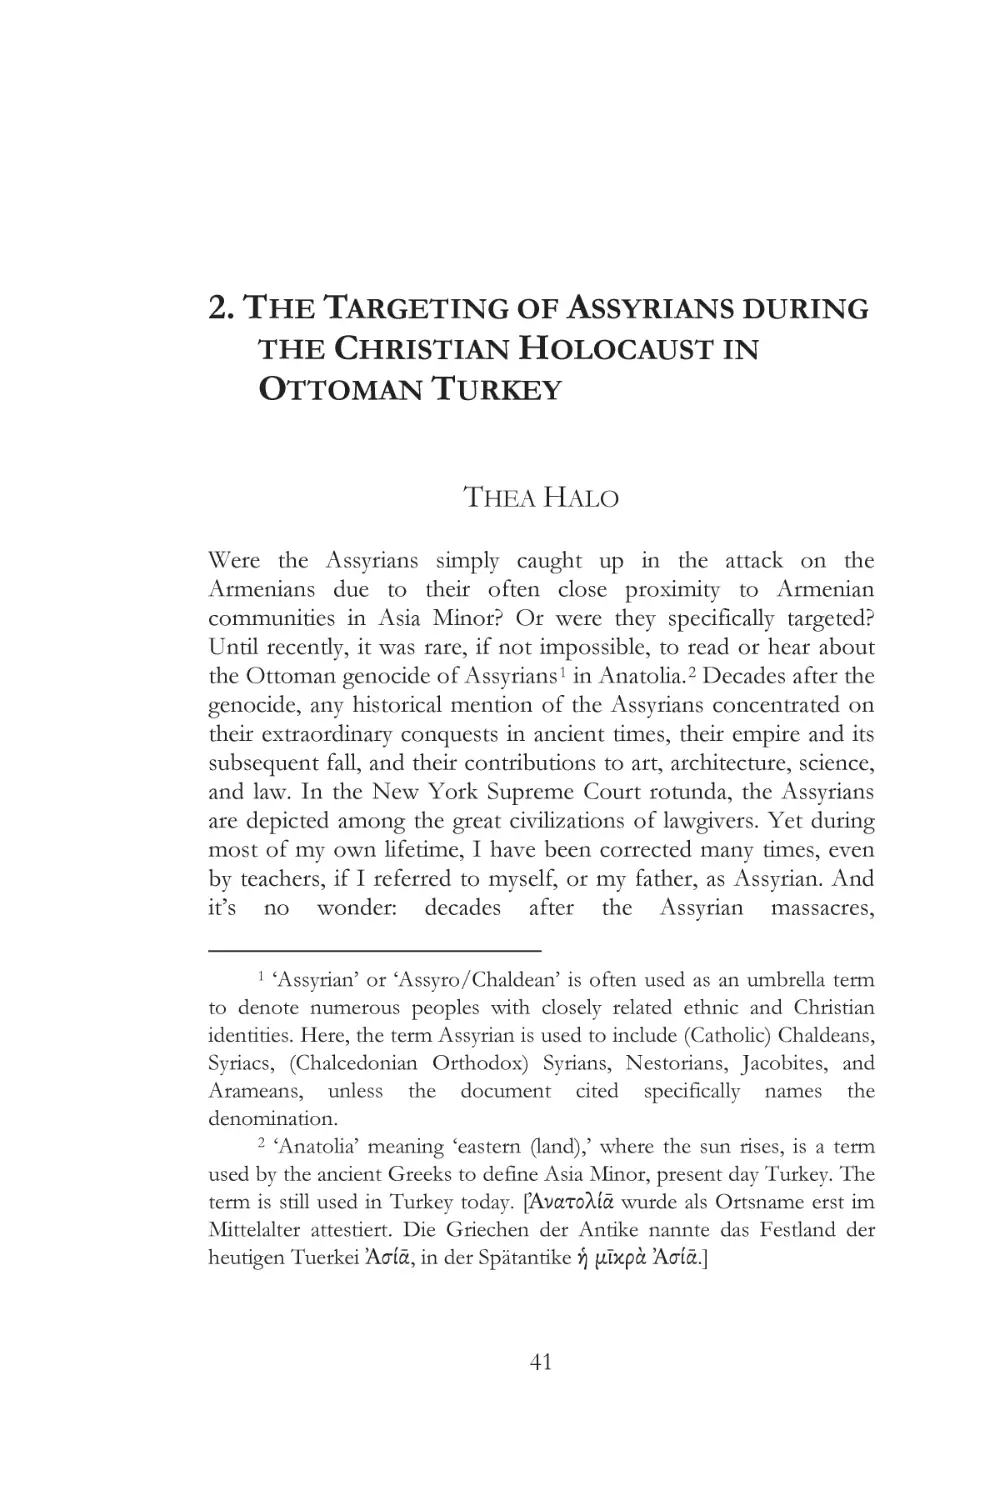 2. THE TARGETING OF ASSYRIANS DURING THE CHRISTIAN HOLOCAUST IN OTTOMAN TURKEY